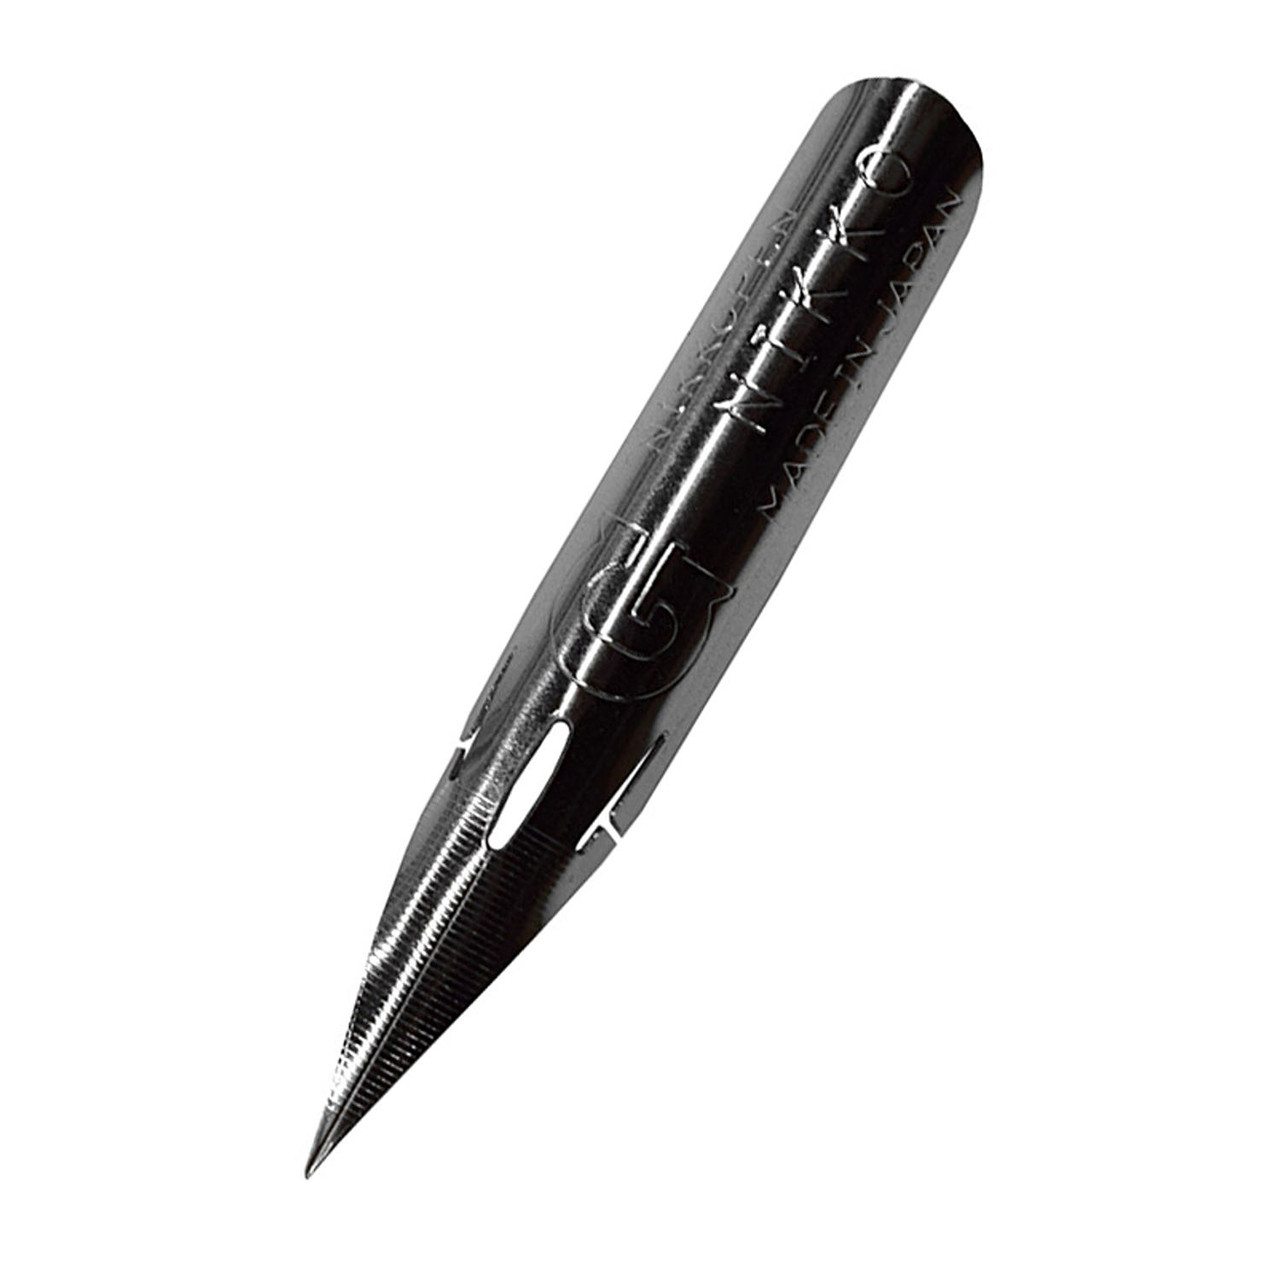 Nikko G Drawing and Calligraphy Nibs - 2/pack